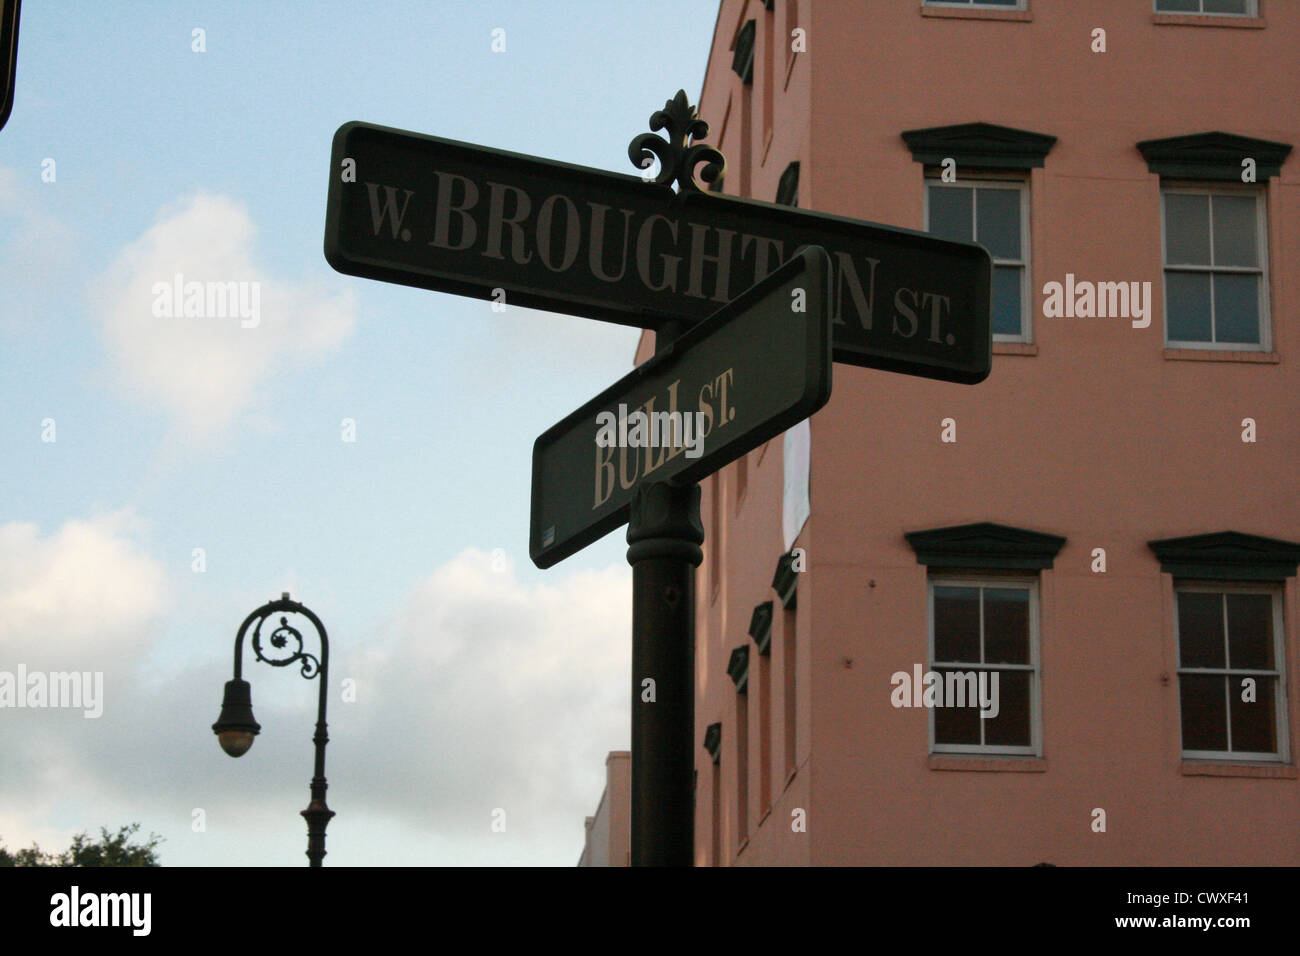 Savannah Georgia GA road sign Broughton and Bull Street intersection with old antique light pole and cityscape architecture Stock Photo